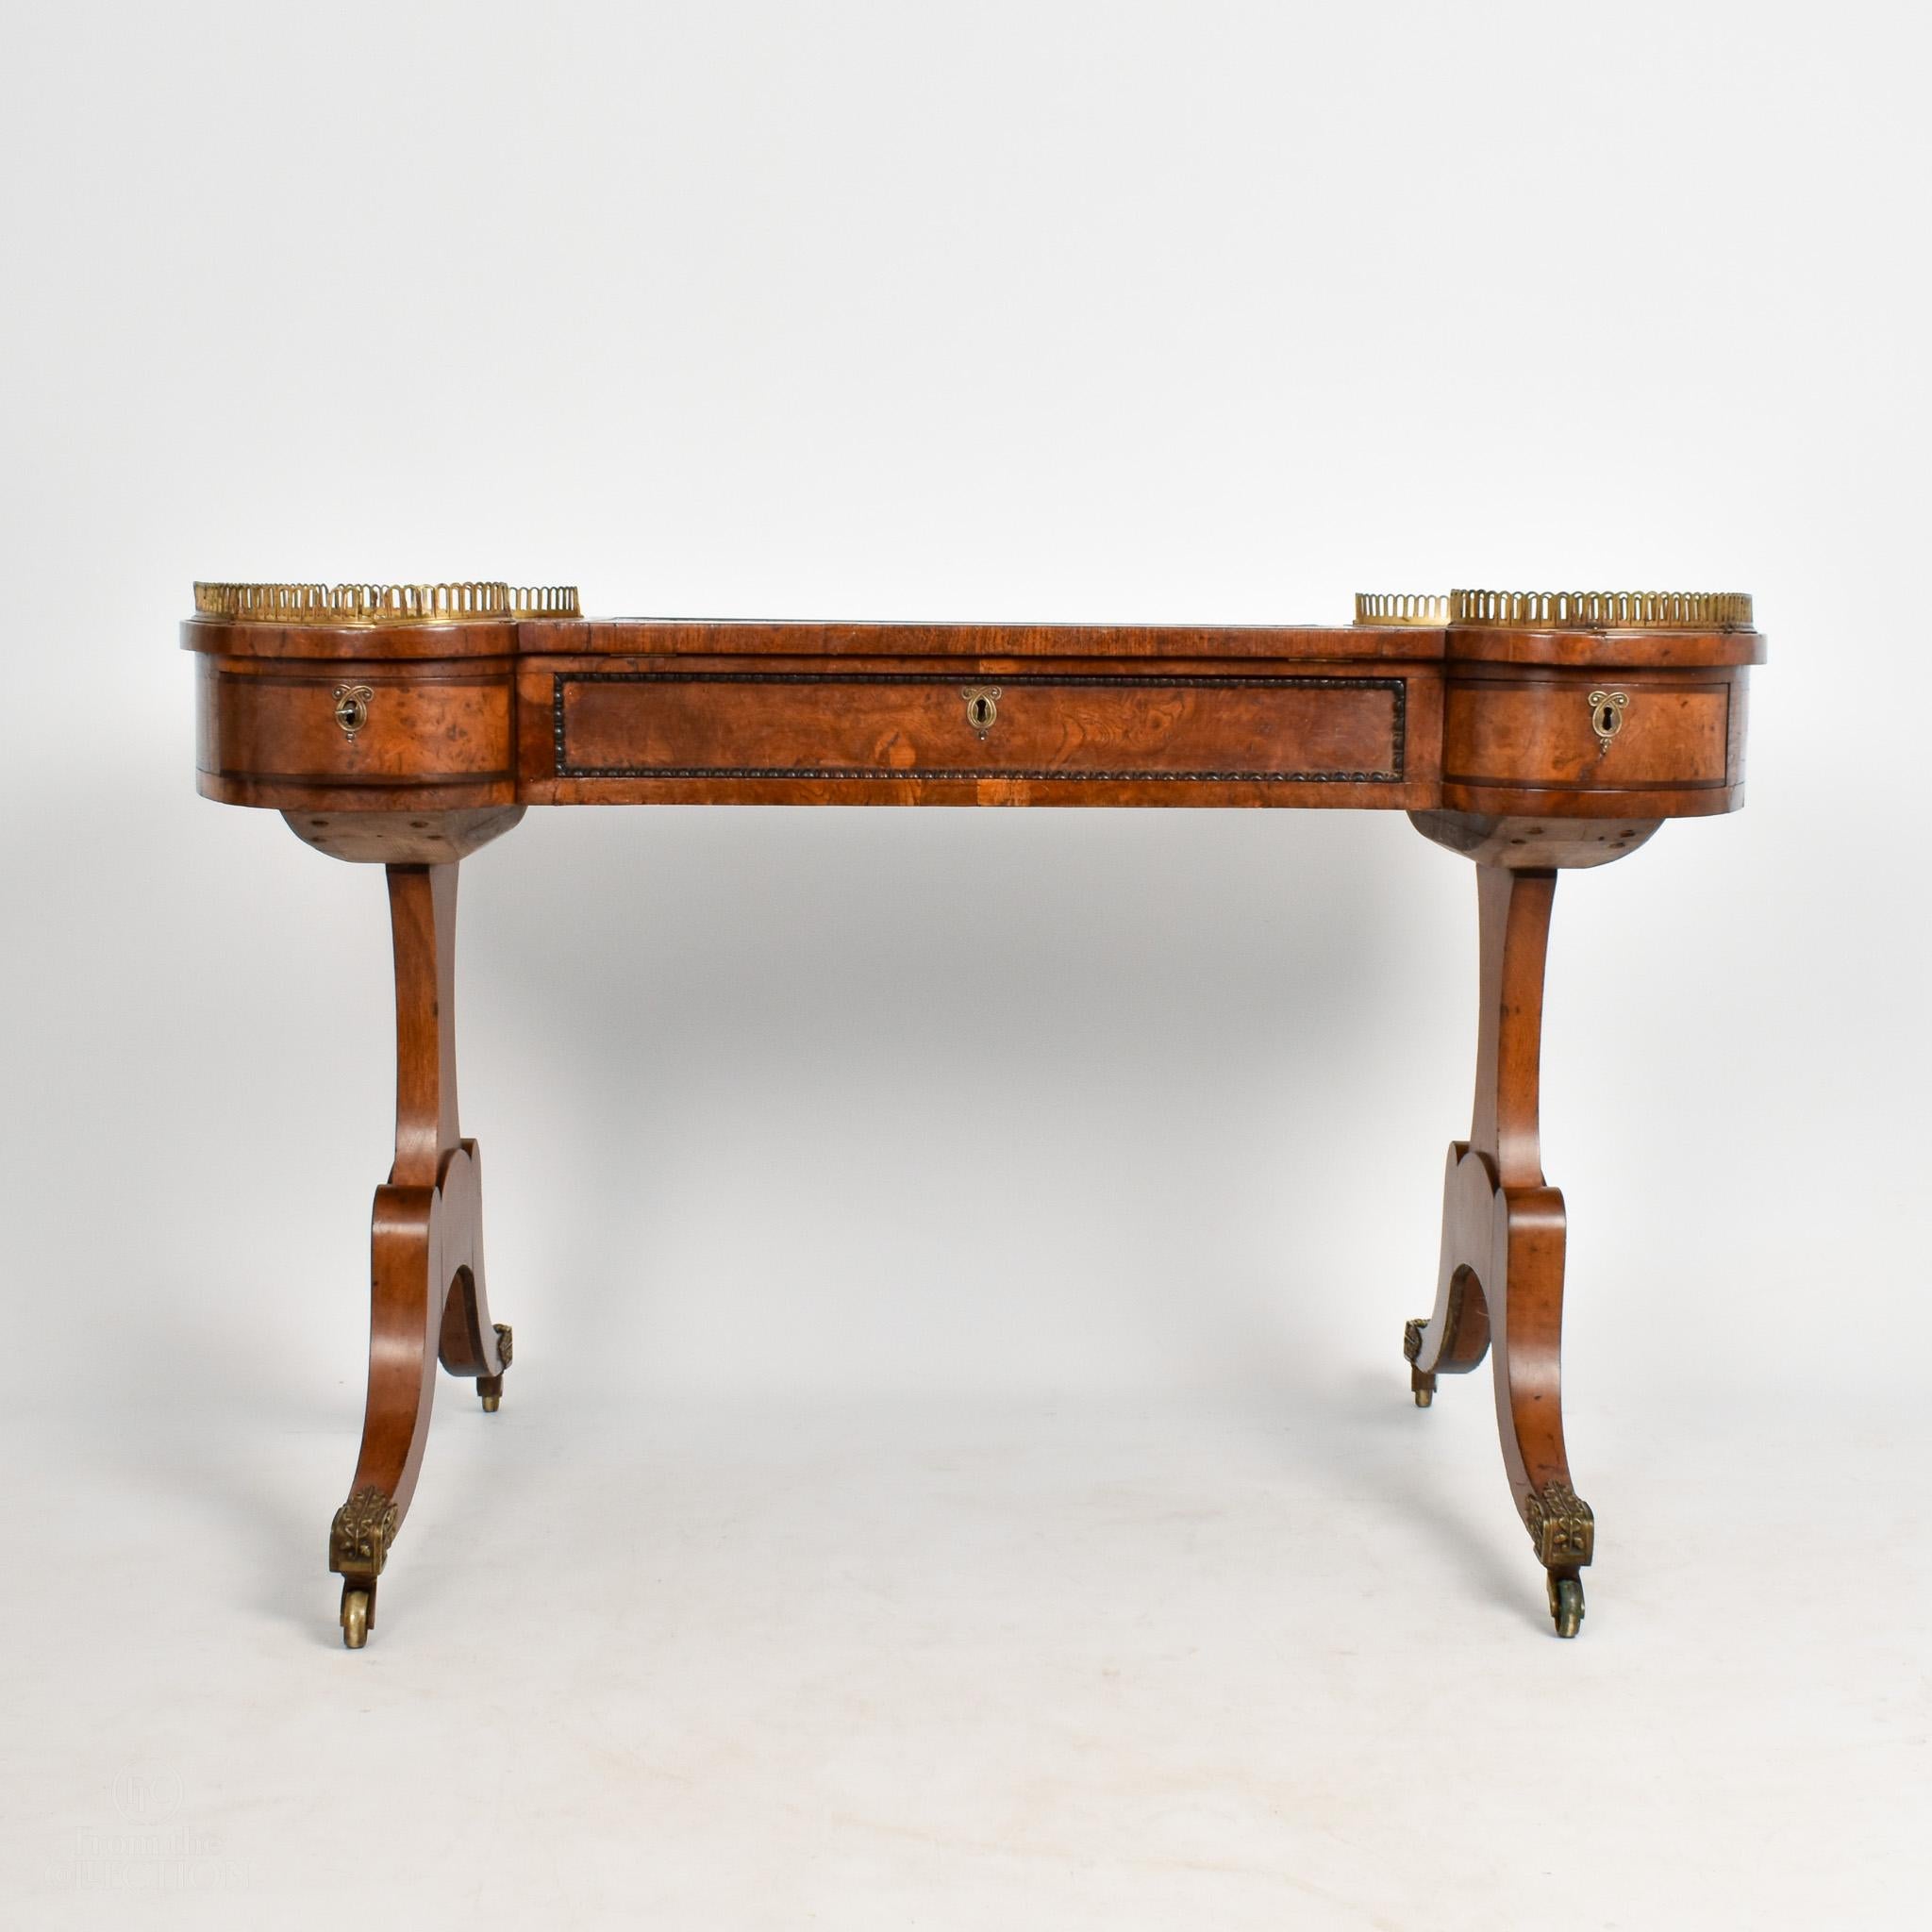 This unusual regency burr oak writing desk is of exceptionally fine quality. The skiver raises towards you for ease of use. The piece is extremely rare due to the burr oak and in great condition. It really is a one off. Burr Oak is rare on a piece